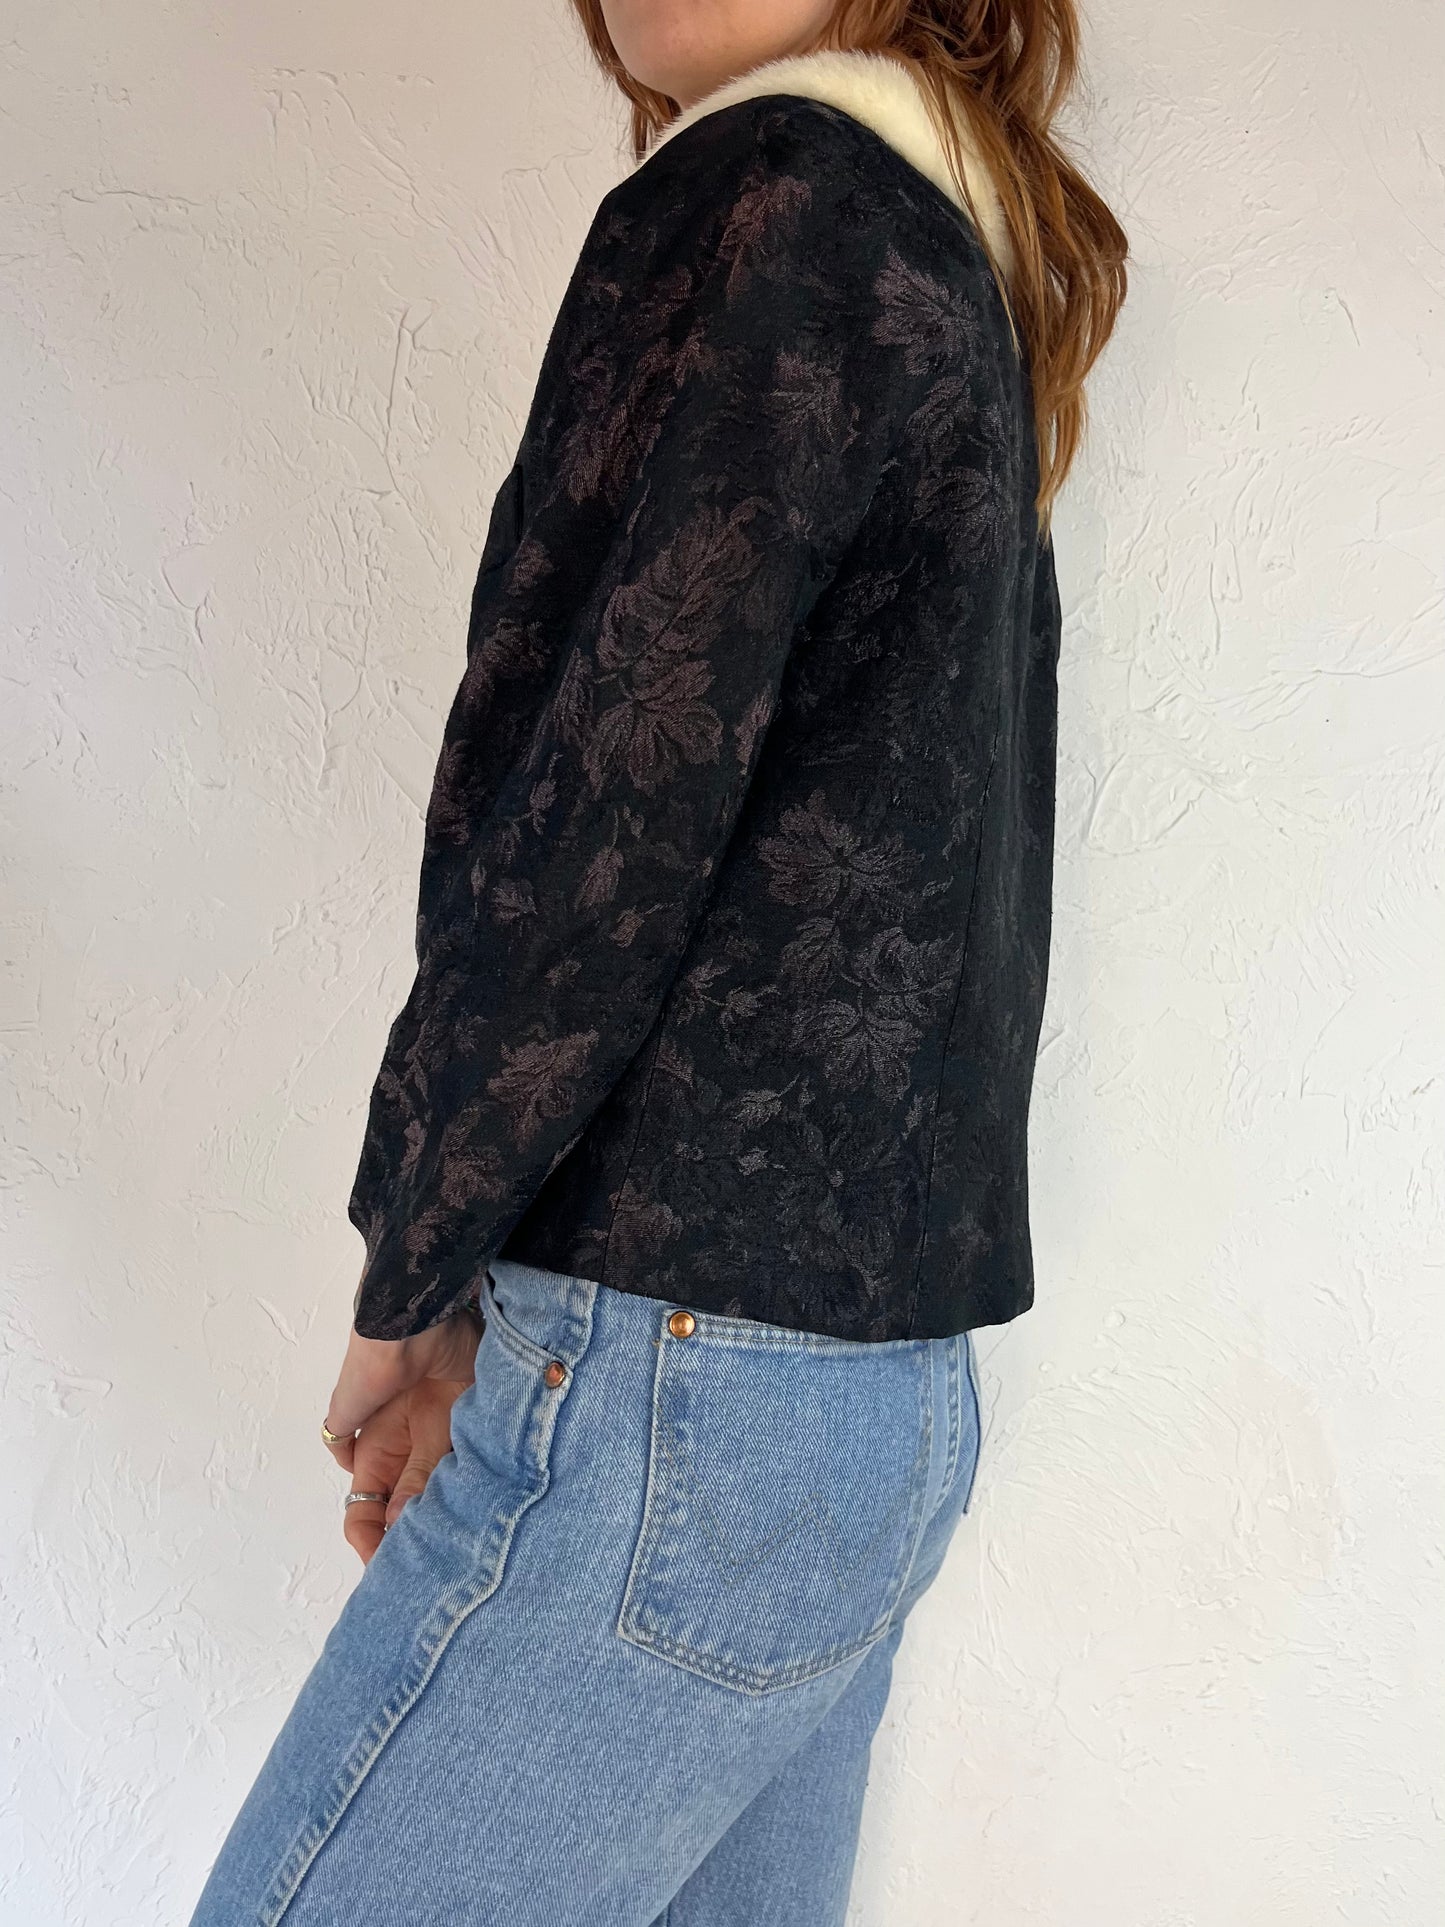 70s 'Best Apparel' Union Made Brocade Evening Jacket / Small